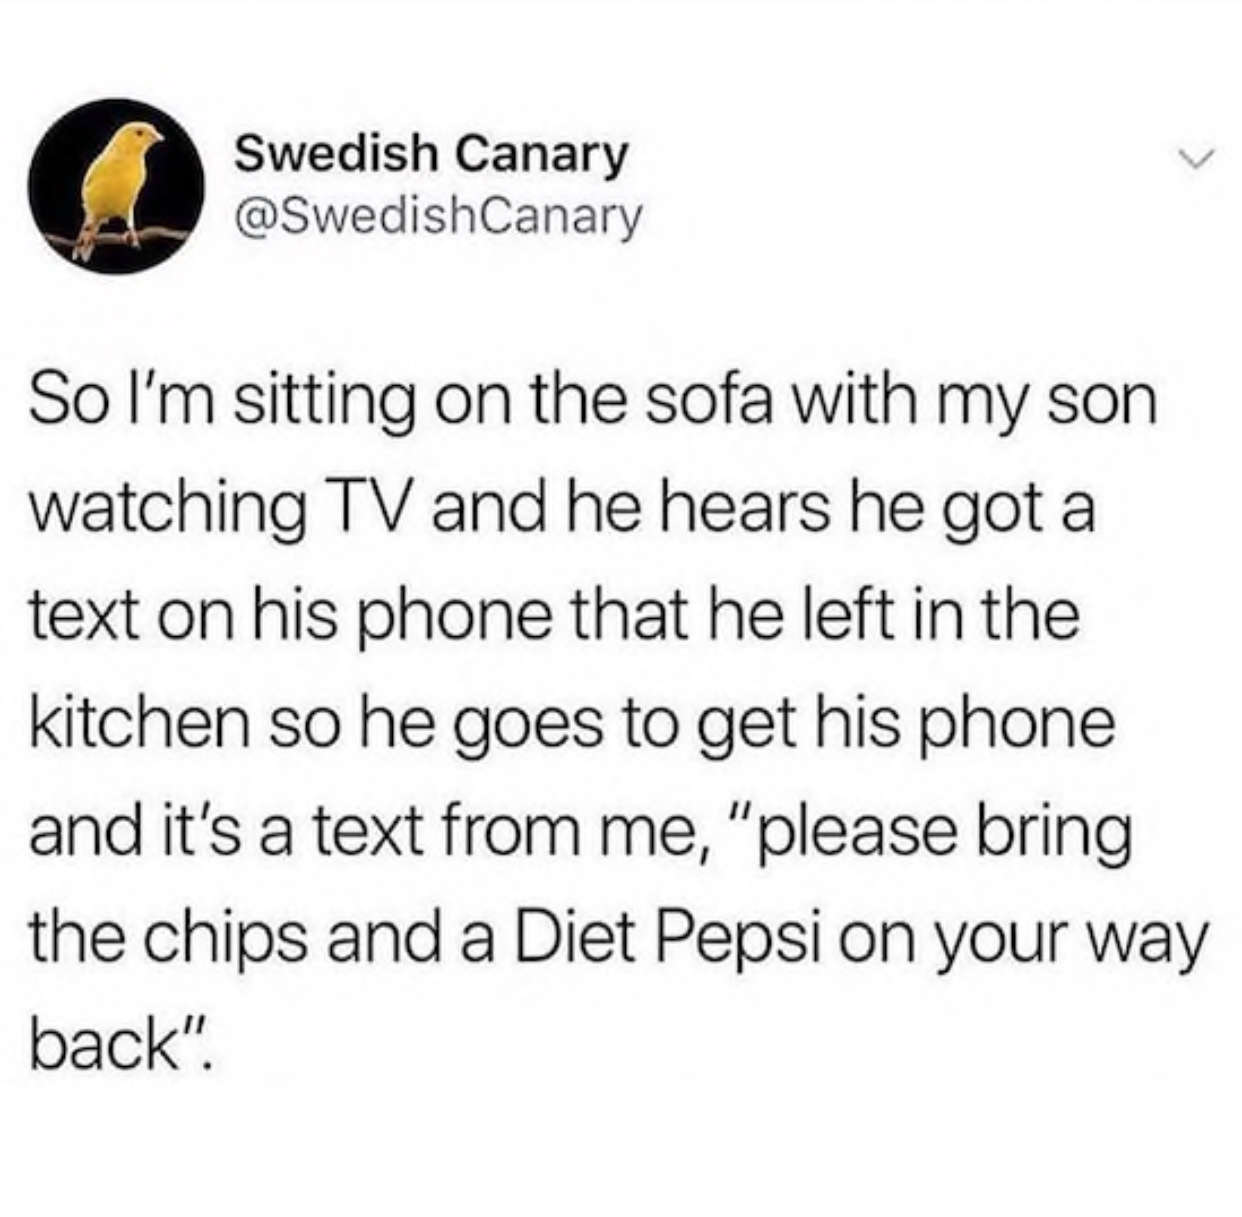 feel like im getting bad again - Swedish Canary So I'm sitting on the sofa with my son watching Tv and he hears he got a text on his phone that he left in the kitchen so he goes to get his phone and it's a text from me, "please bring the chips and a Diet 